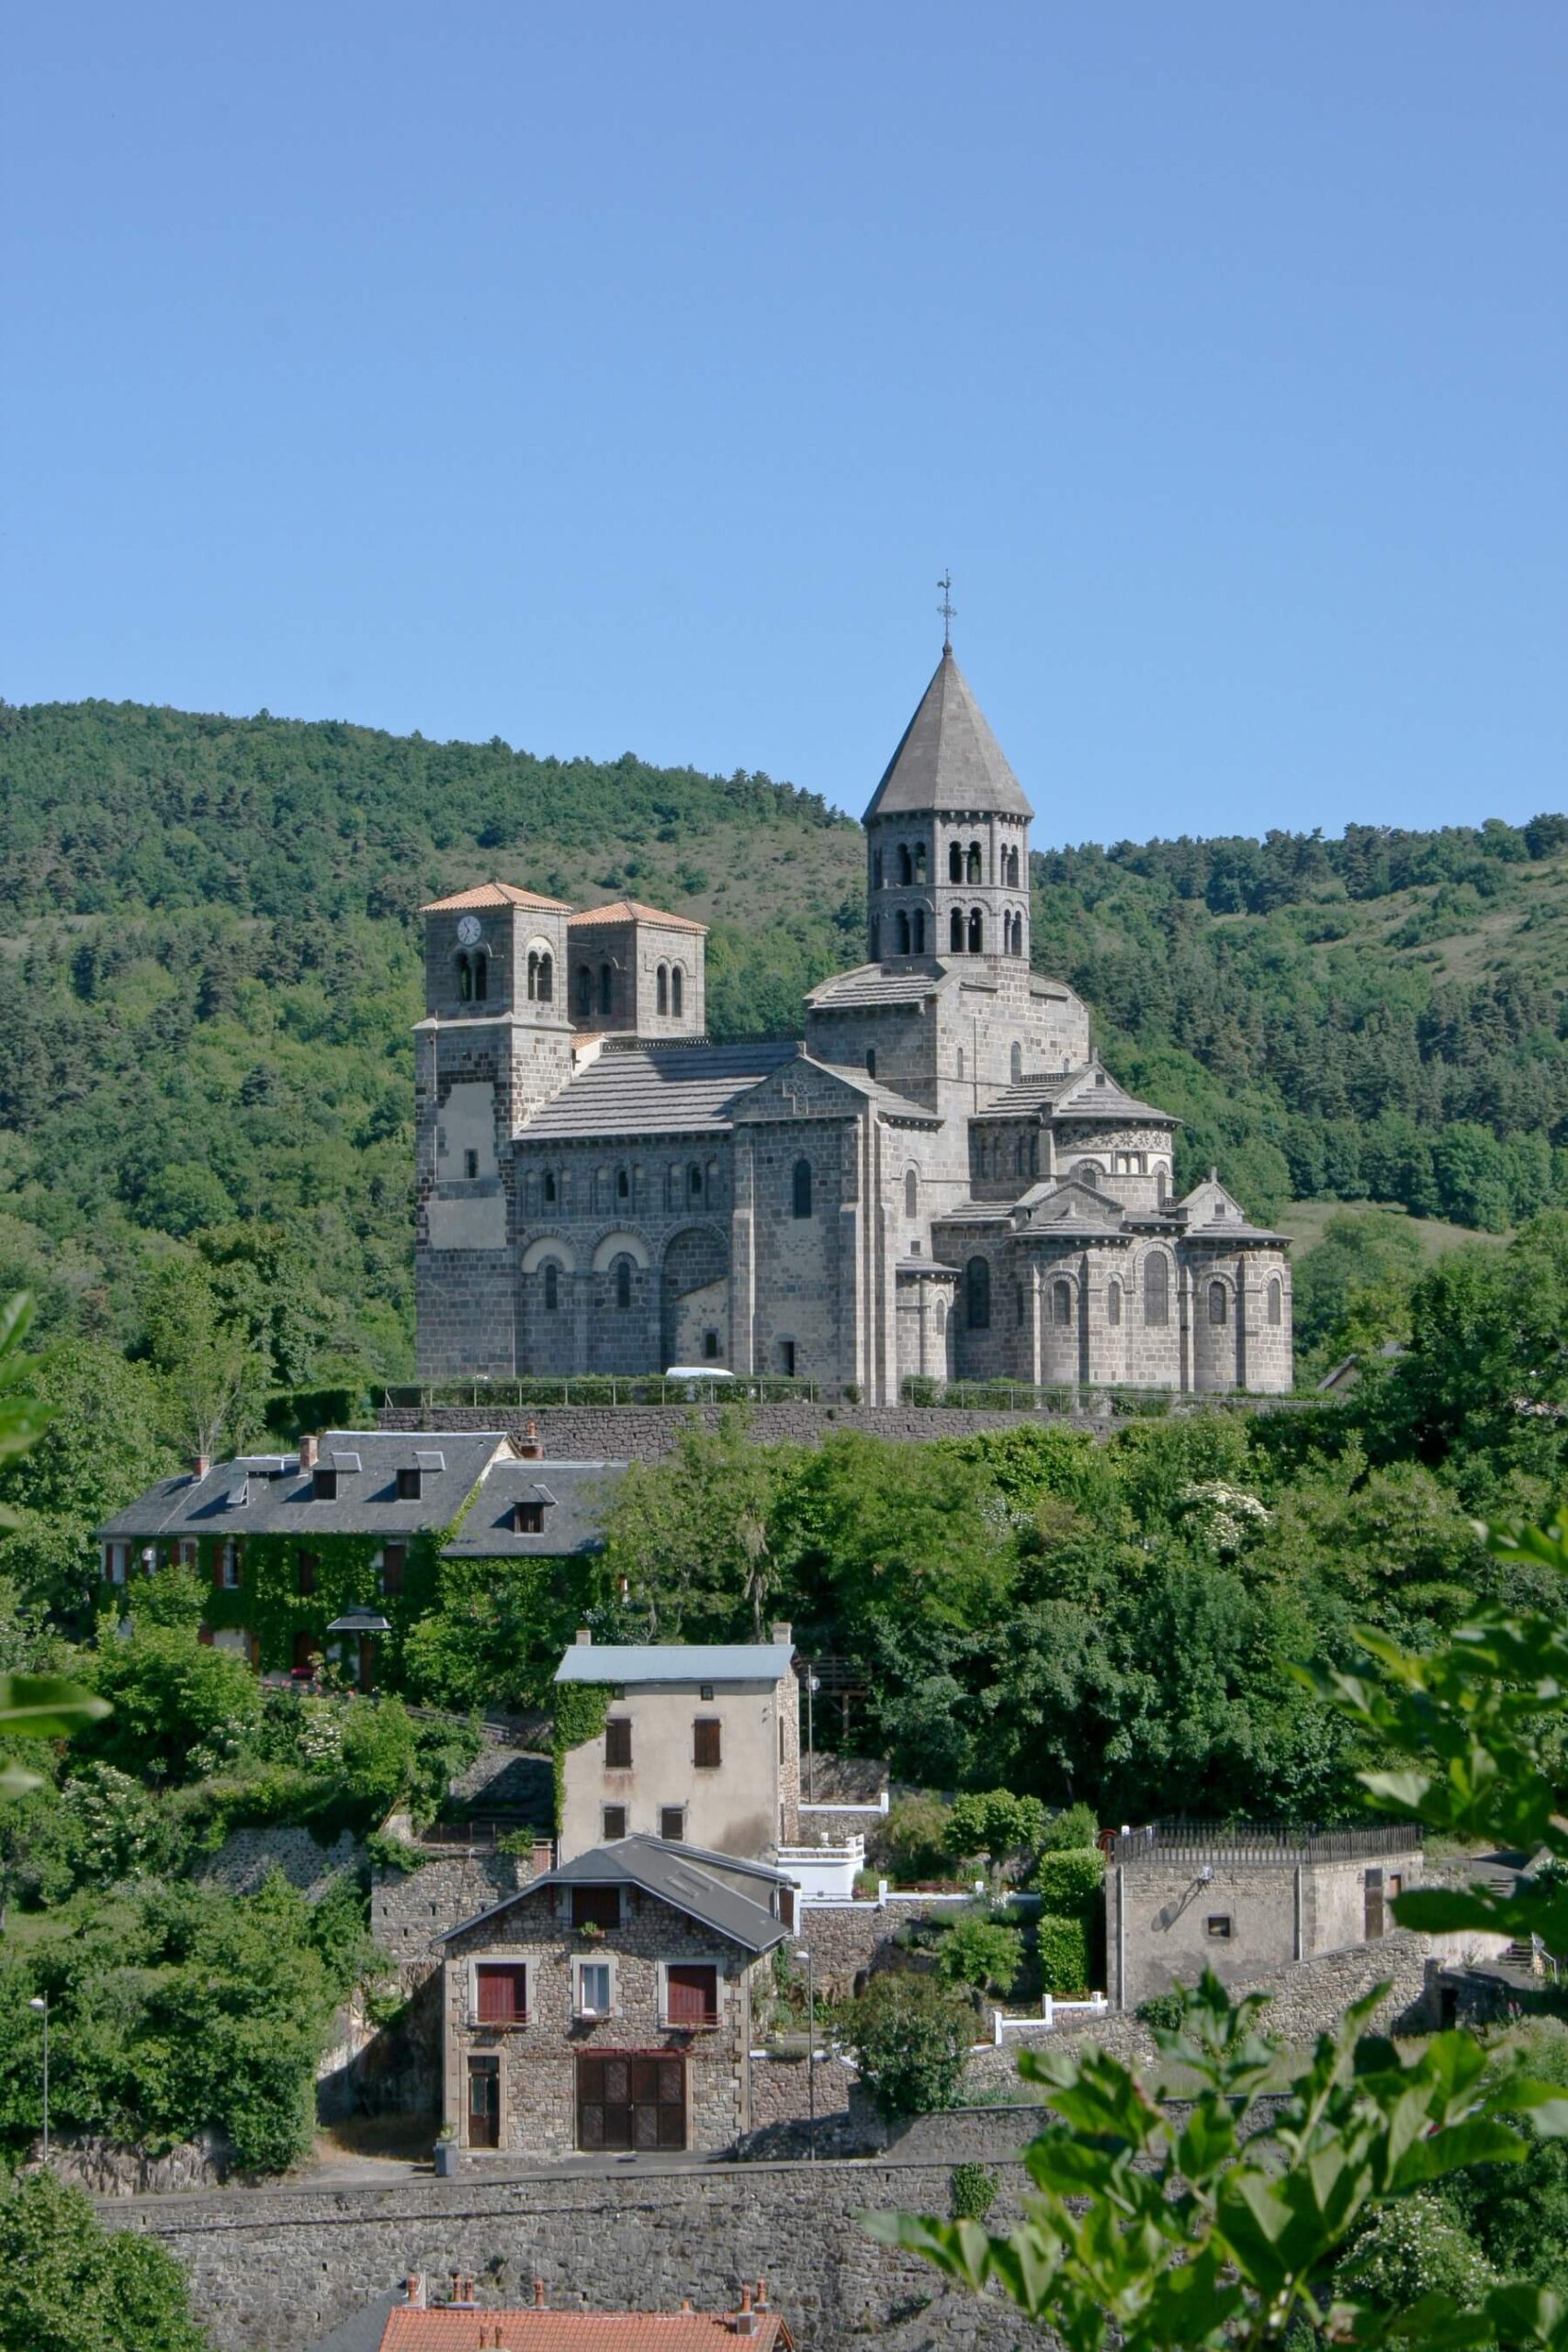 The basilica of Saint-Nectaire